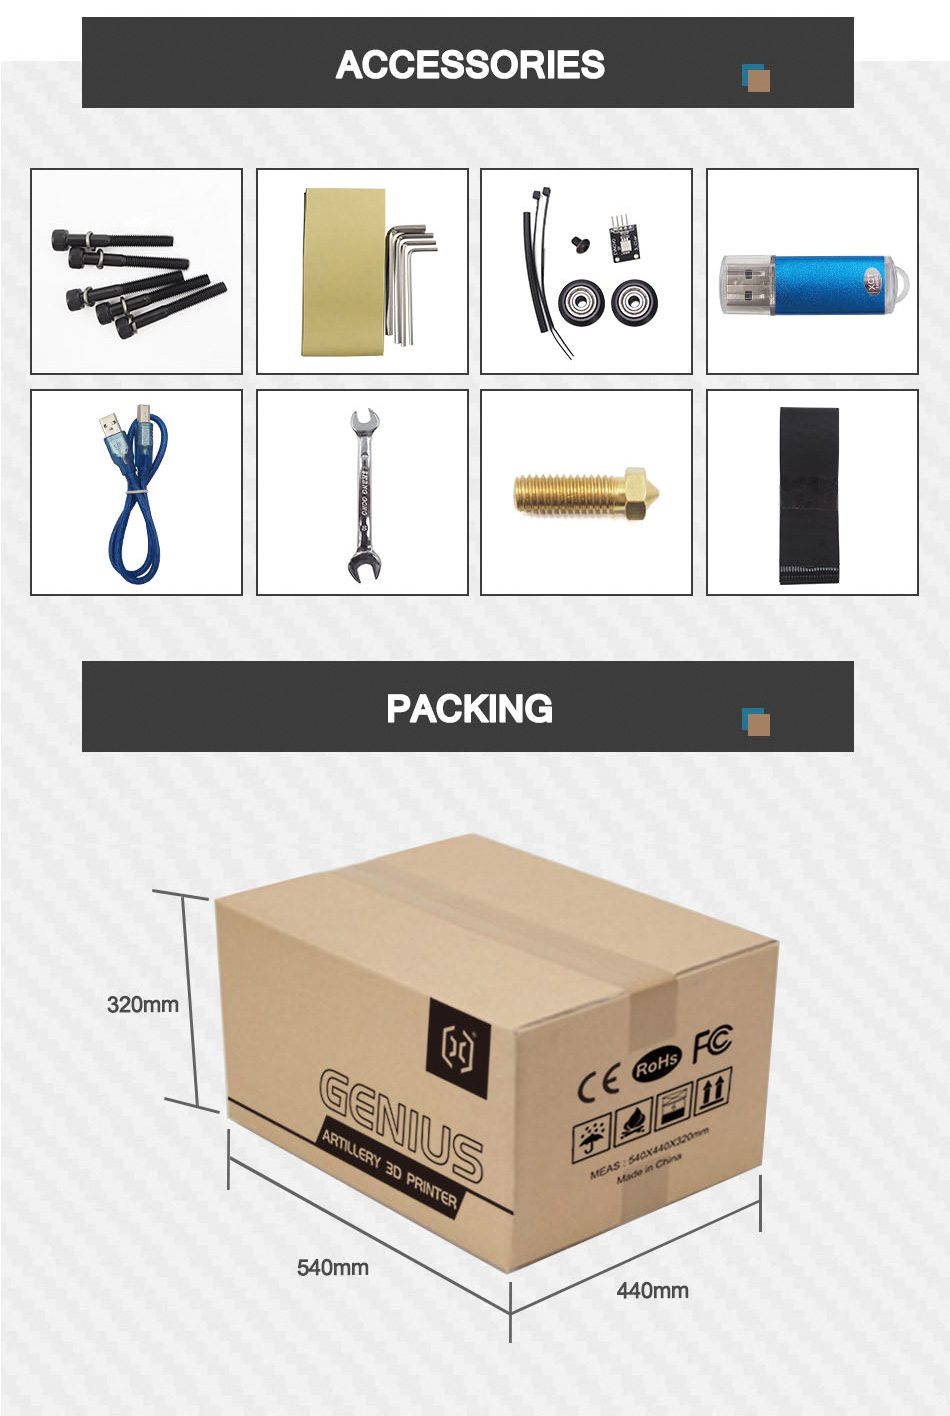 Artillery Genius Accessories and Packing